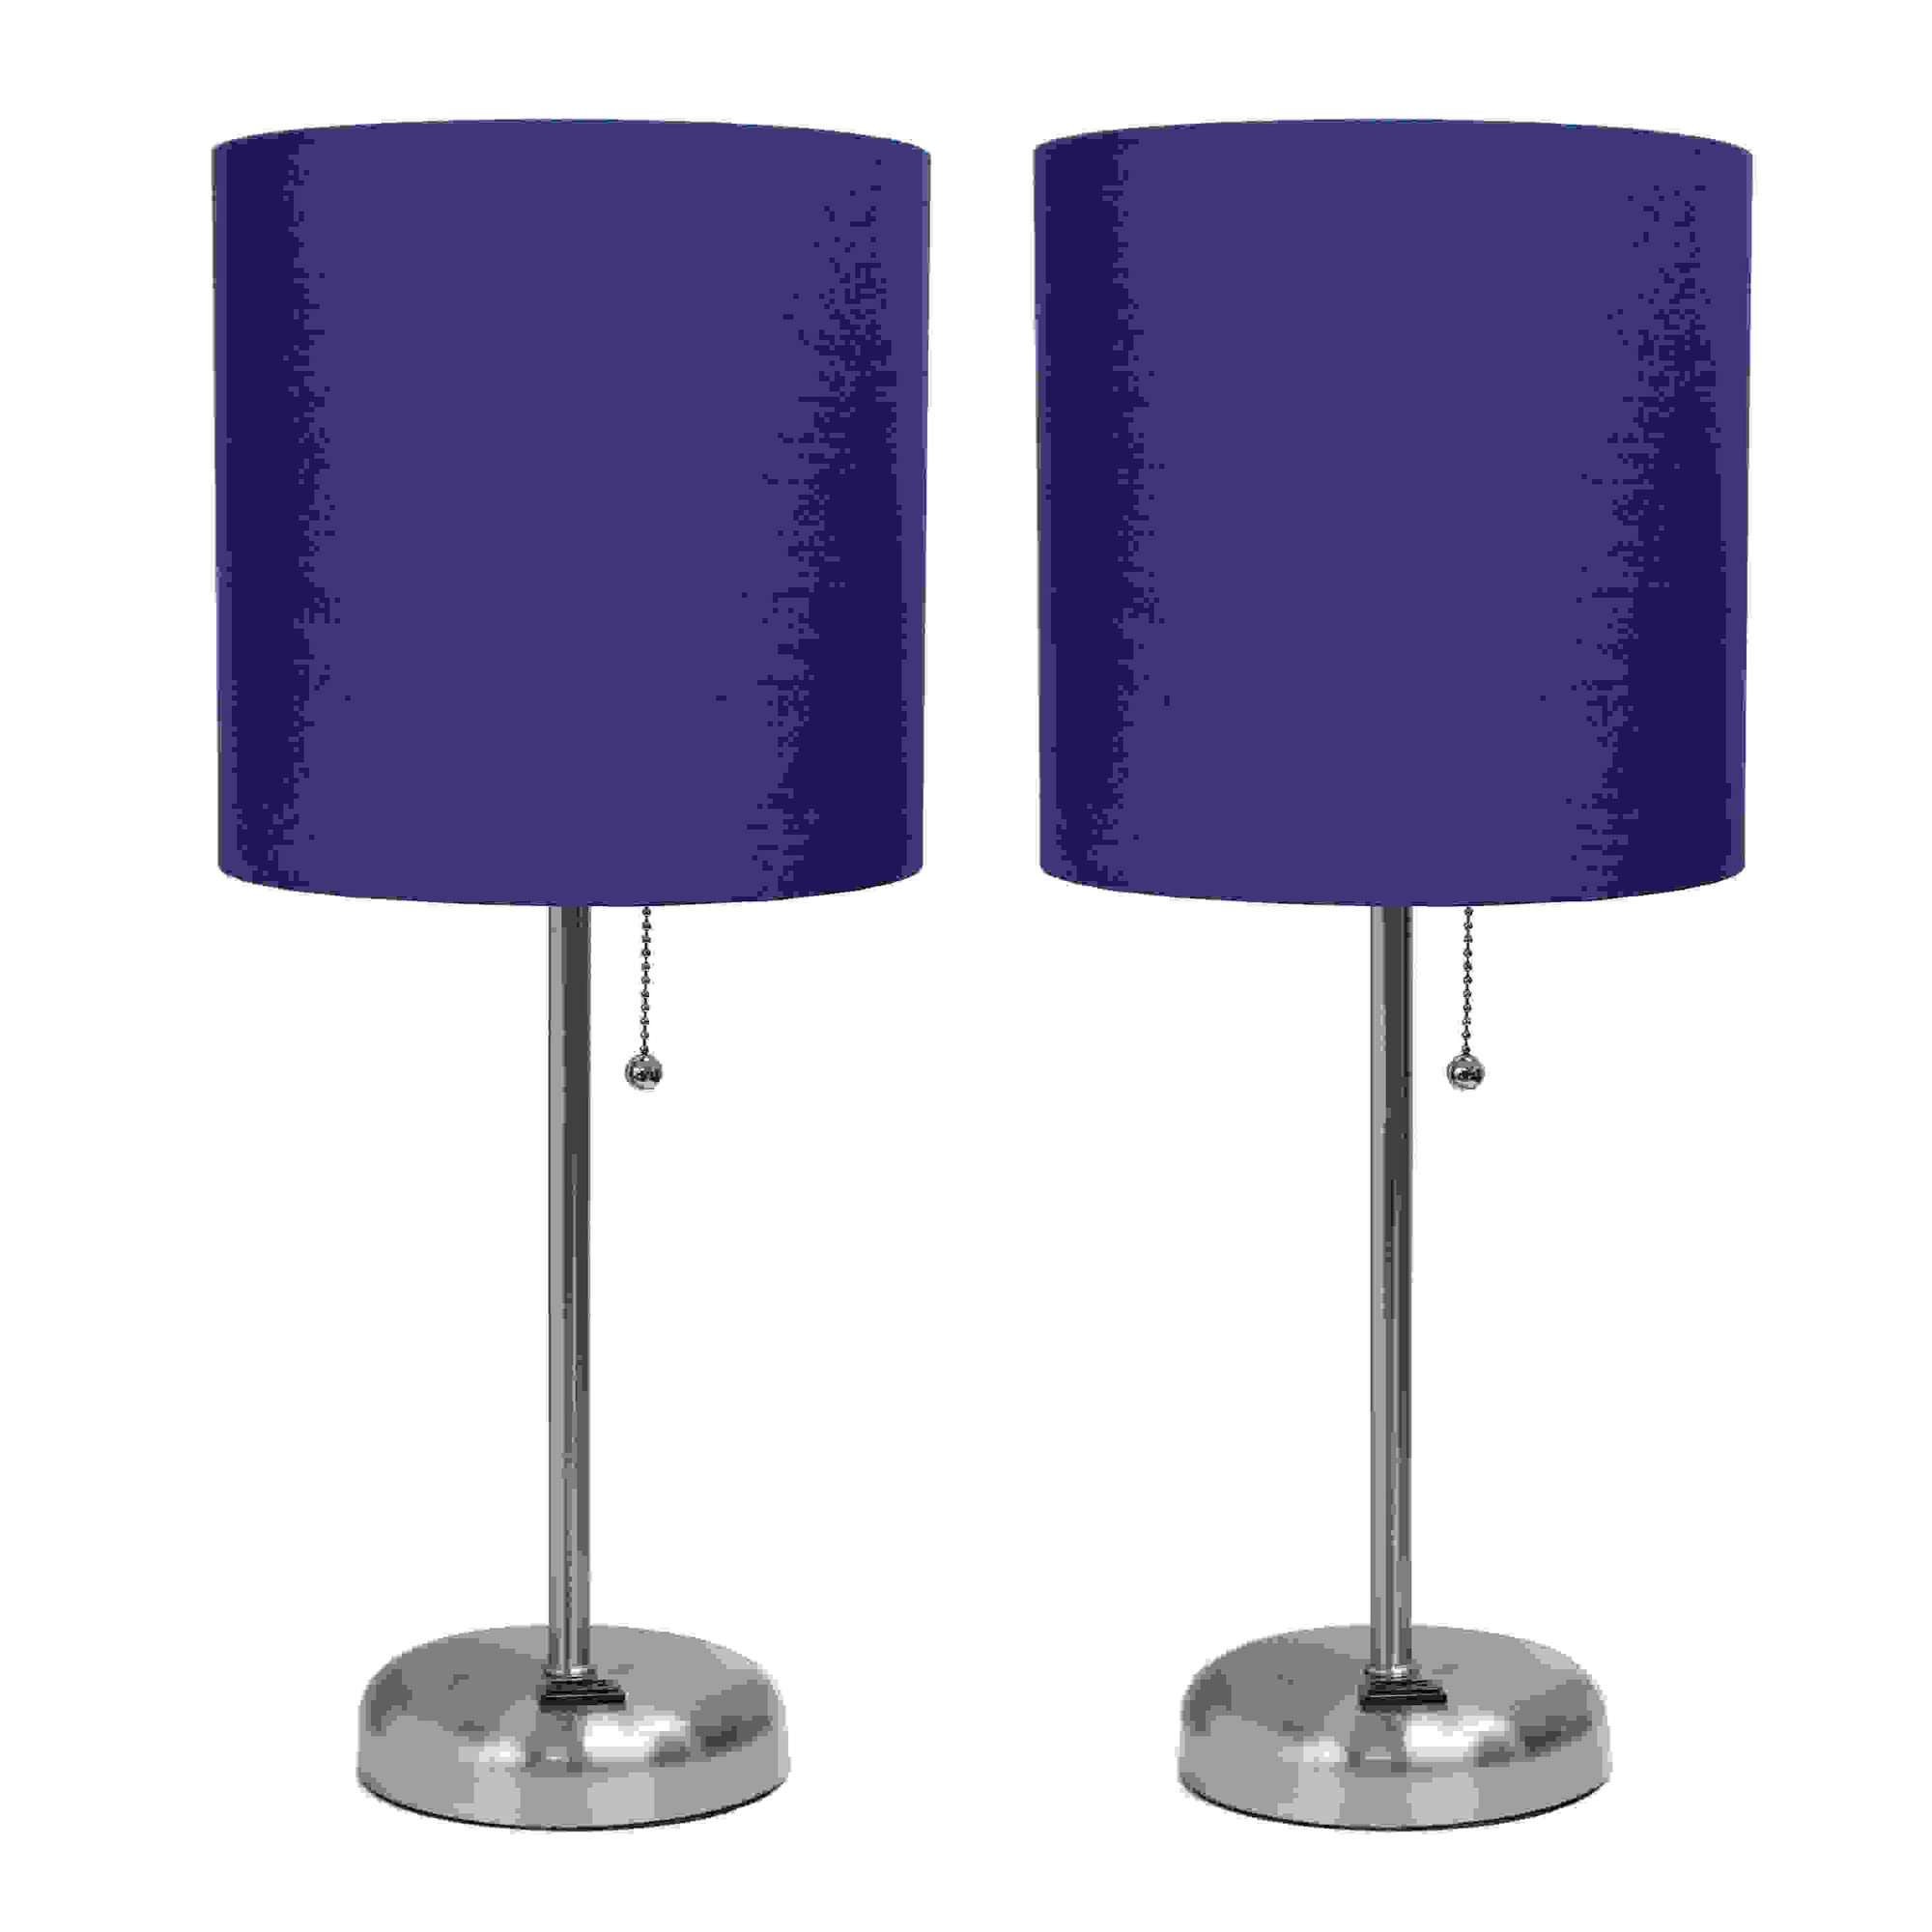 Simple Designs Brushed Steel Stick Lamp with Charging Outlet and Fabric Shade 2 Pack Set, Navy